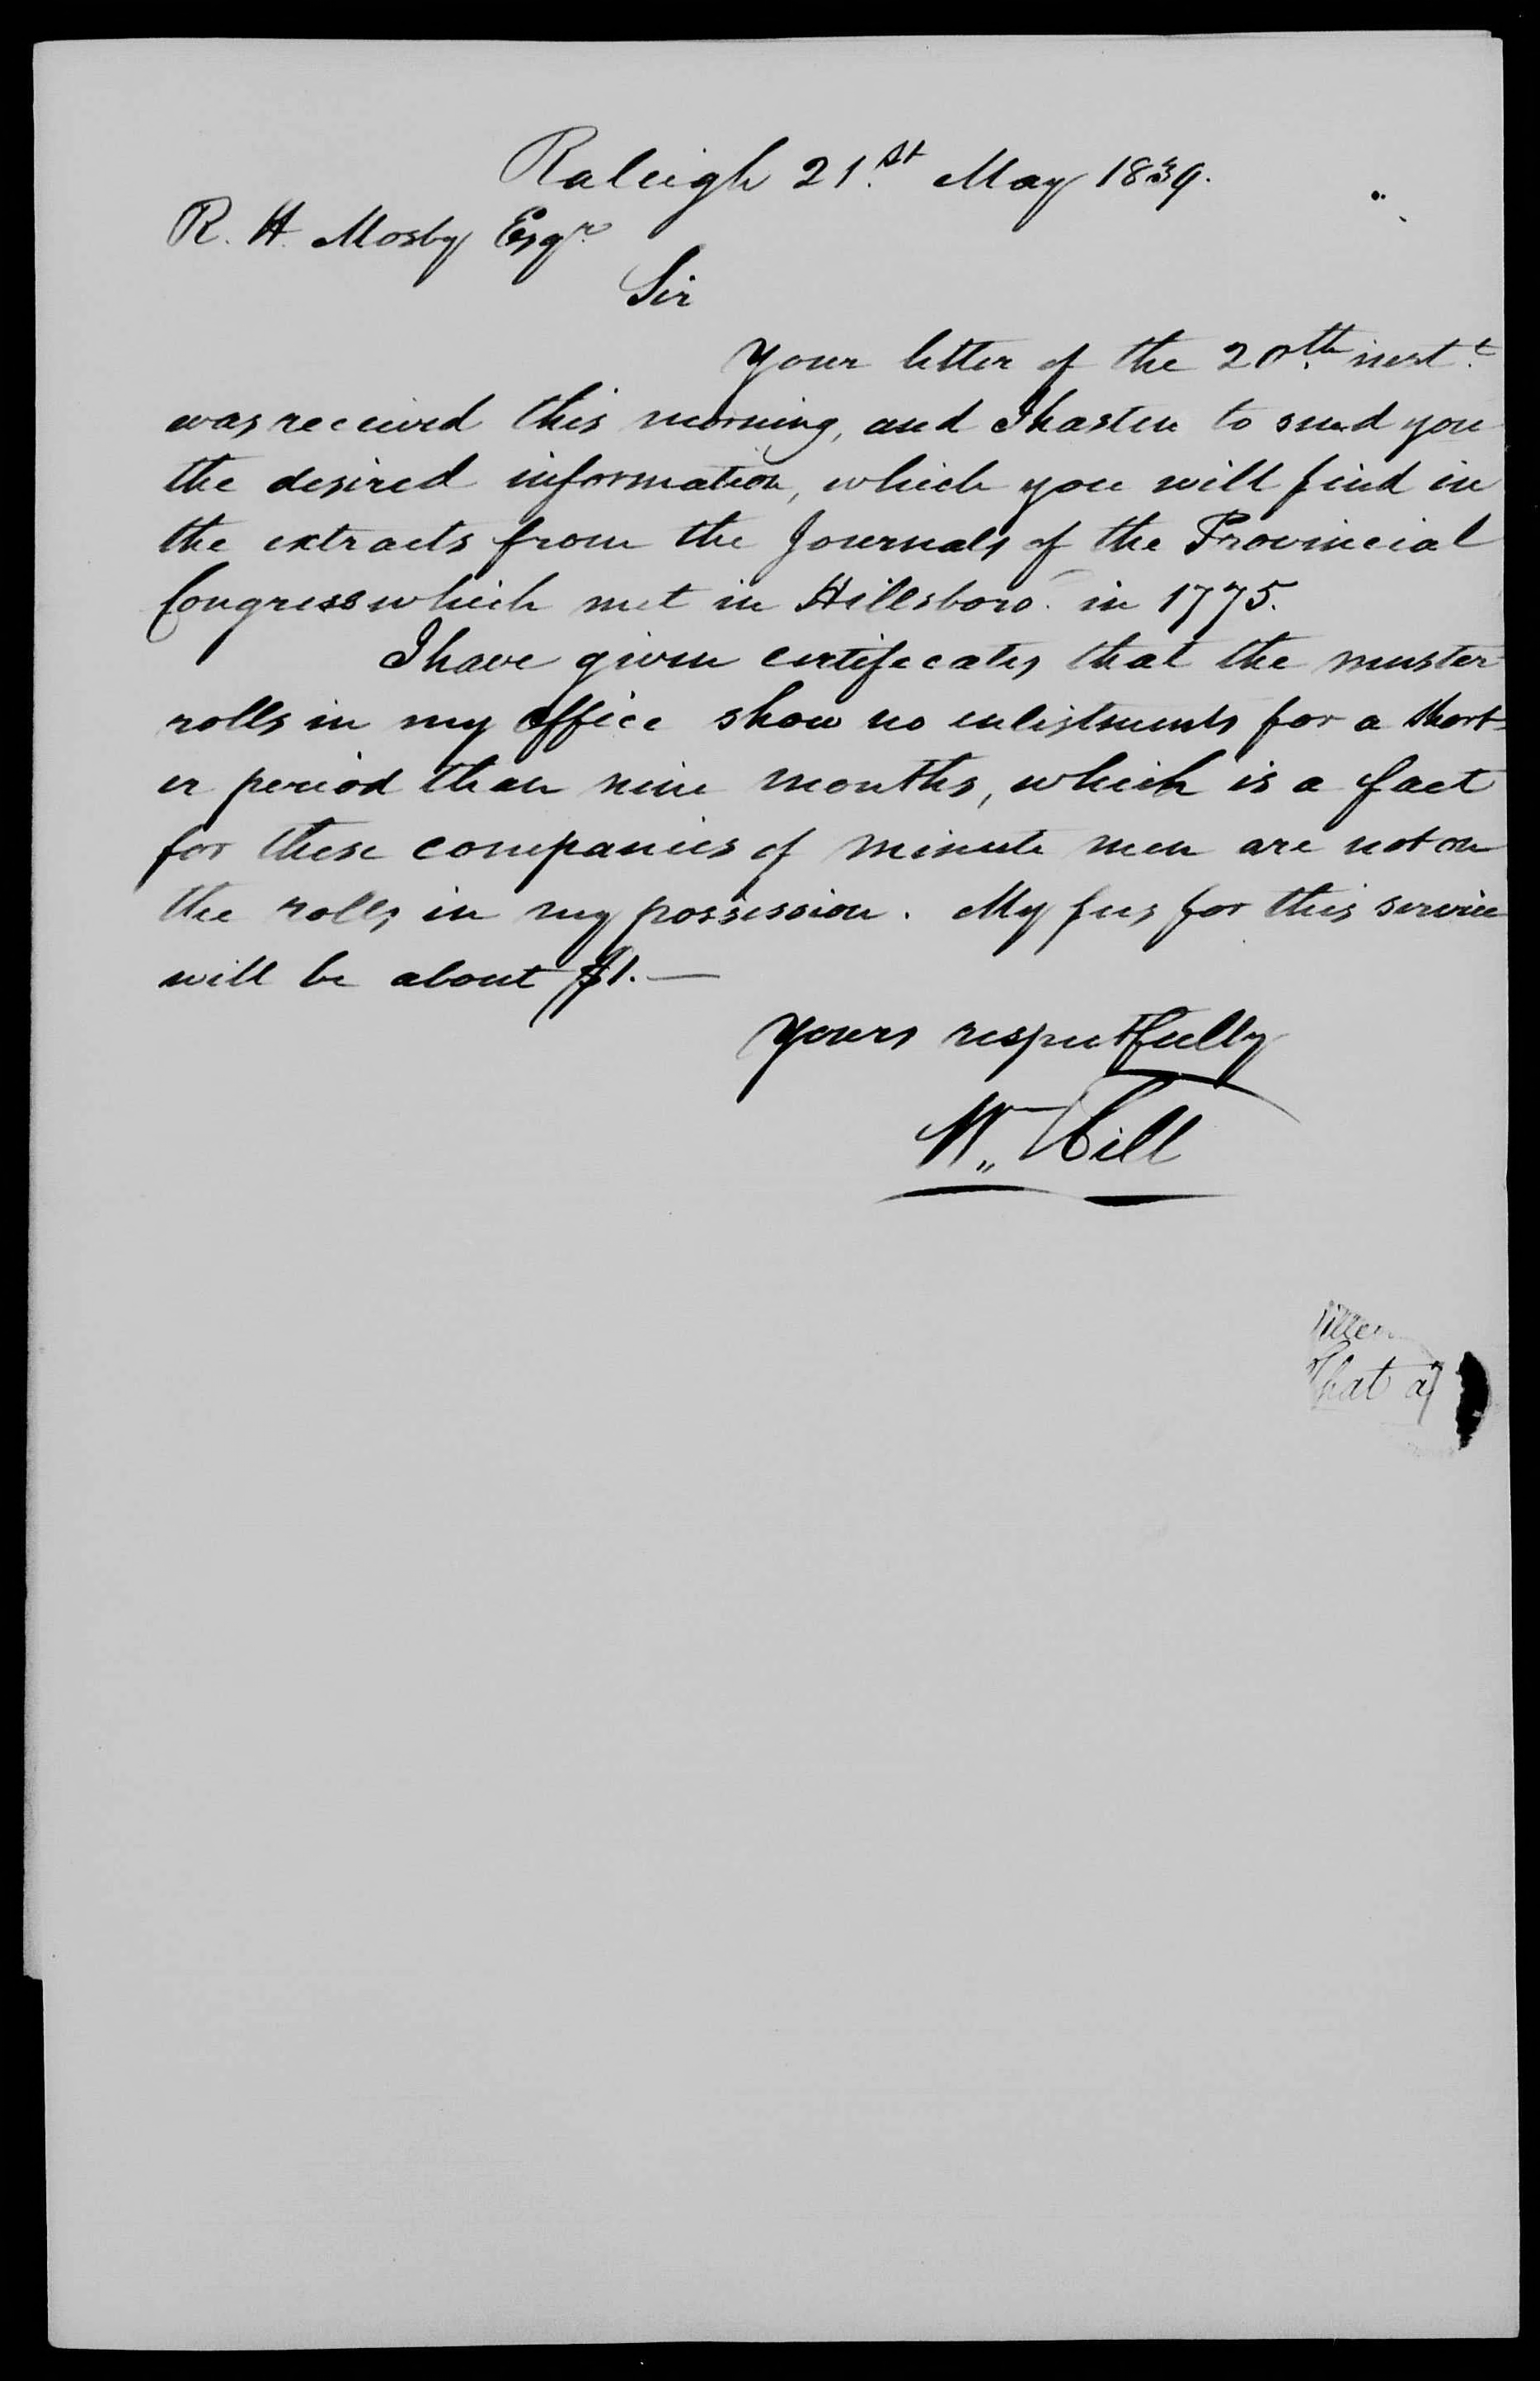 Letter from W. Hill to R. H. Mosby, 21 May 1839